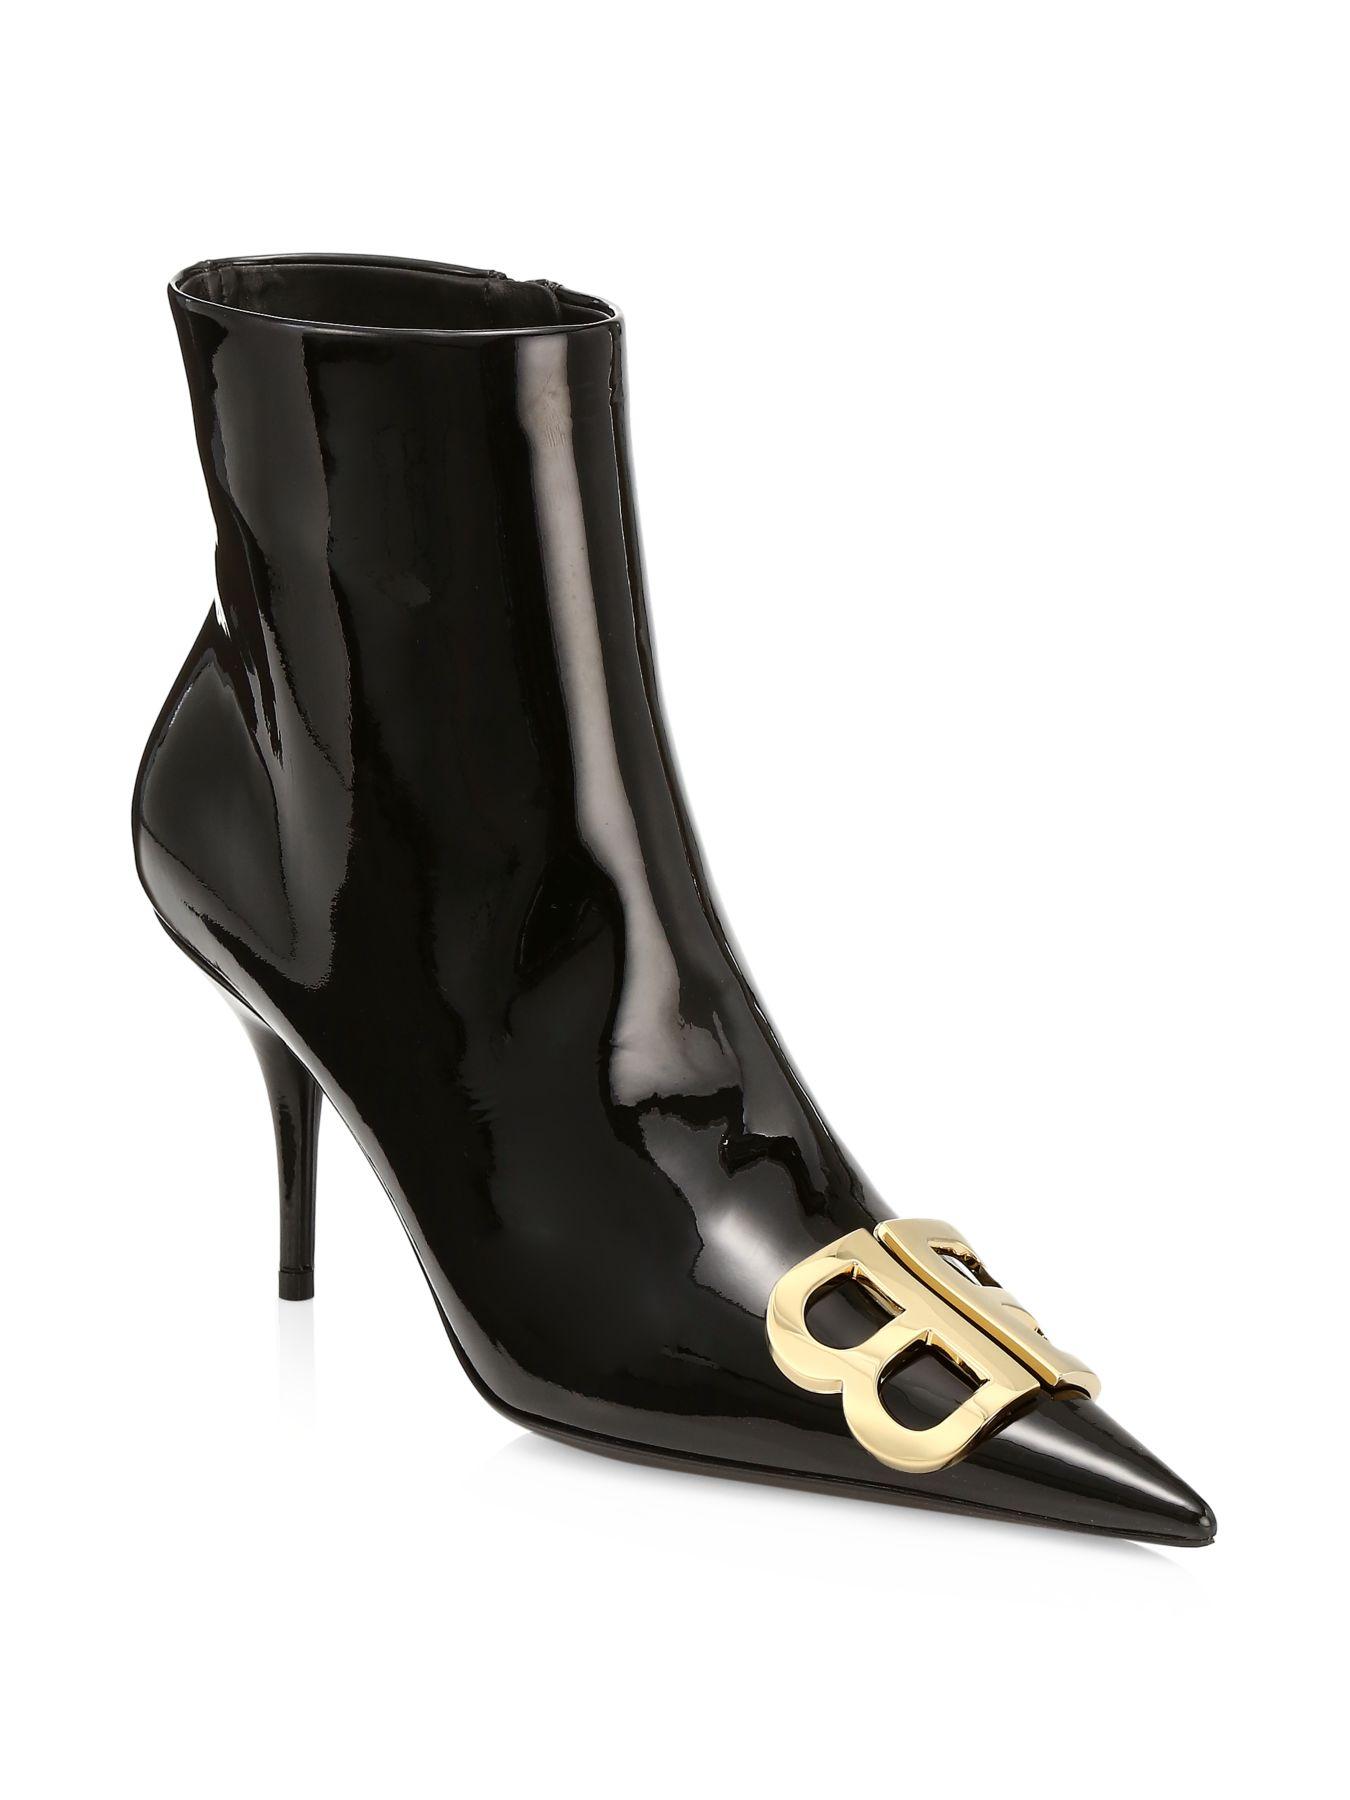 Balenciaga Bb Ankle Boots in Black | Lyst